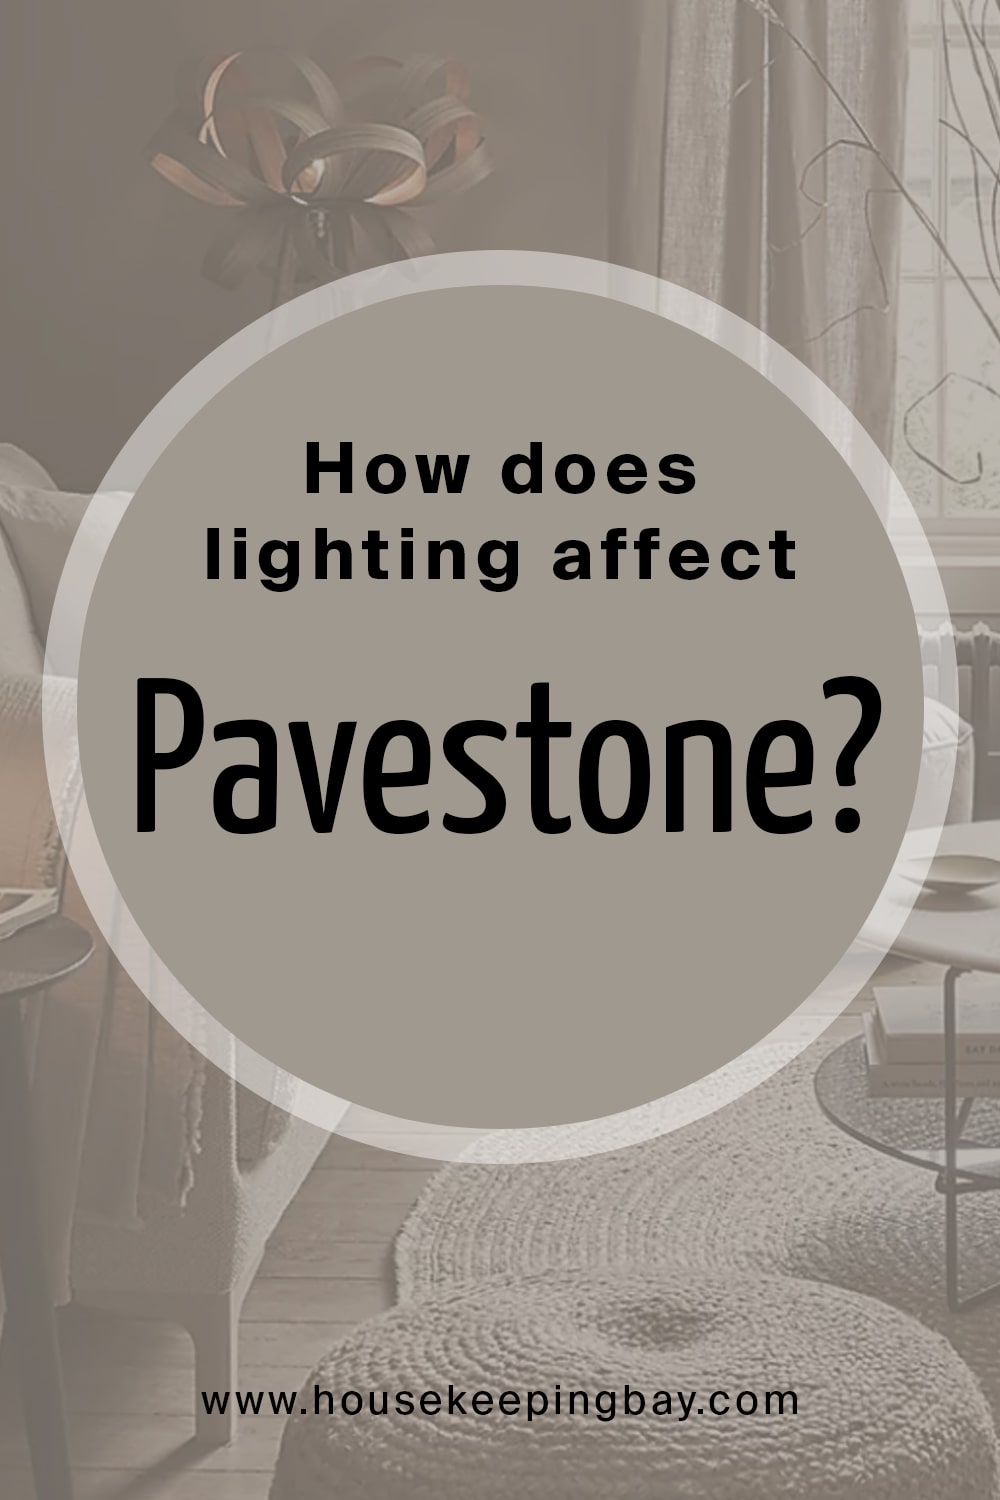 How does lighting affect Pavestone